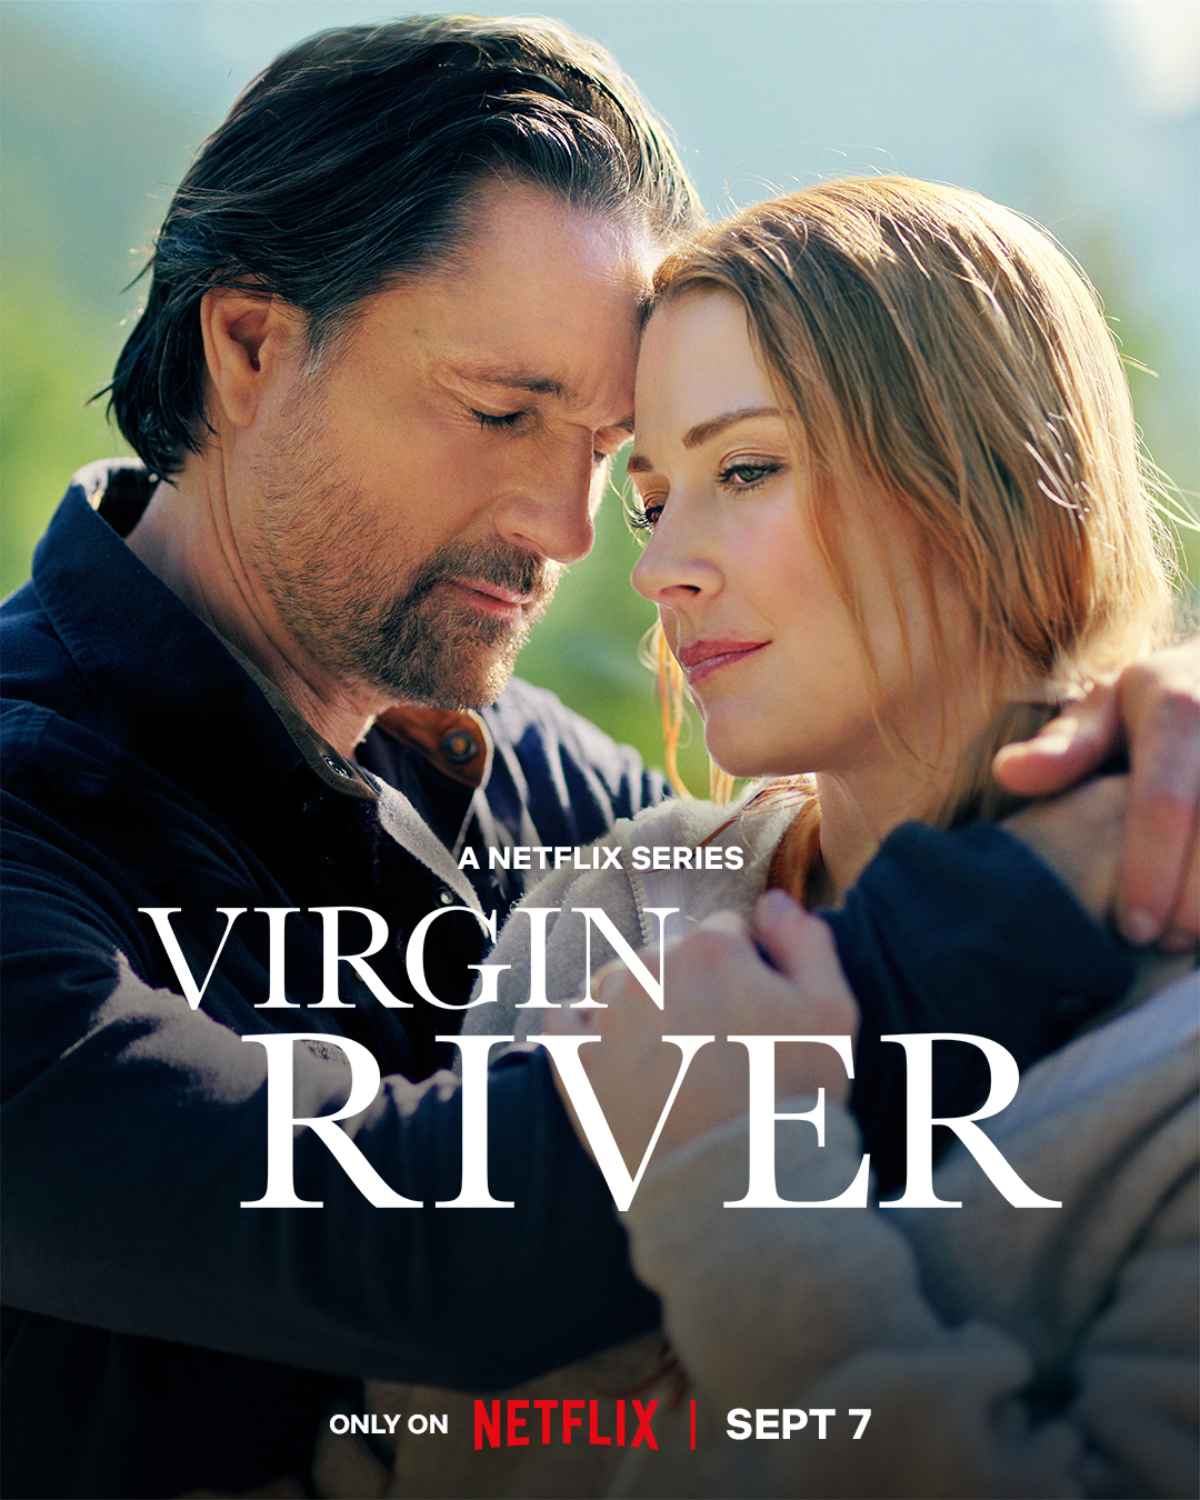 “Virgin River” Season 5 Part 1 – Available to Stream on Netflix Now